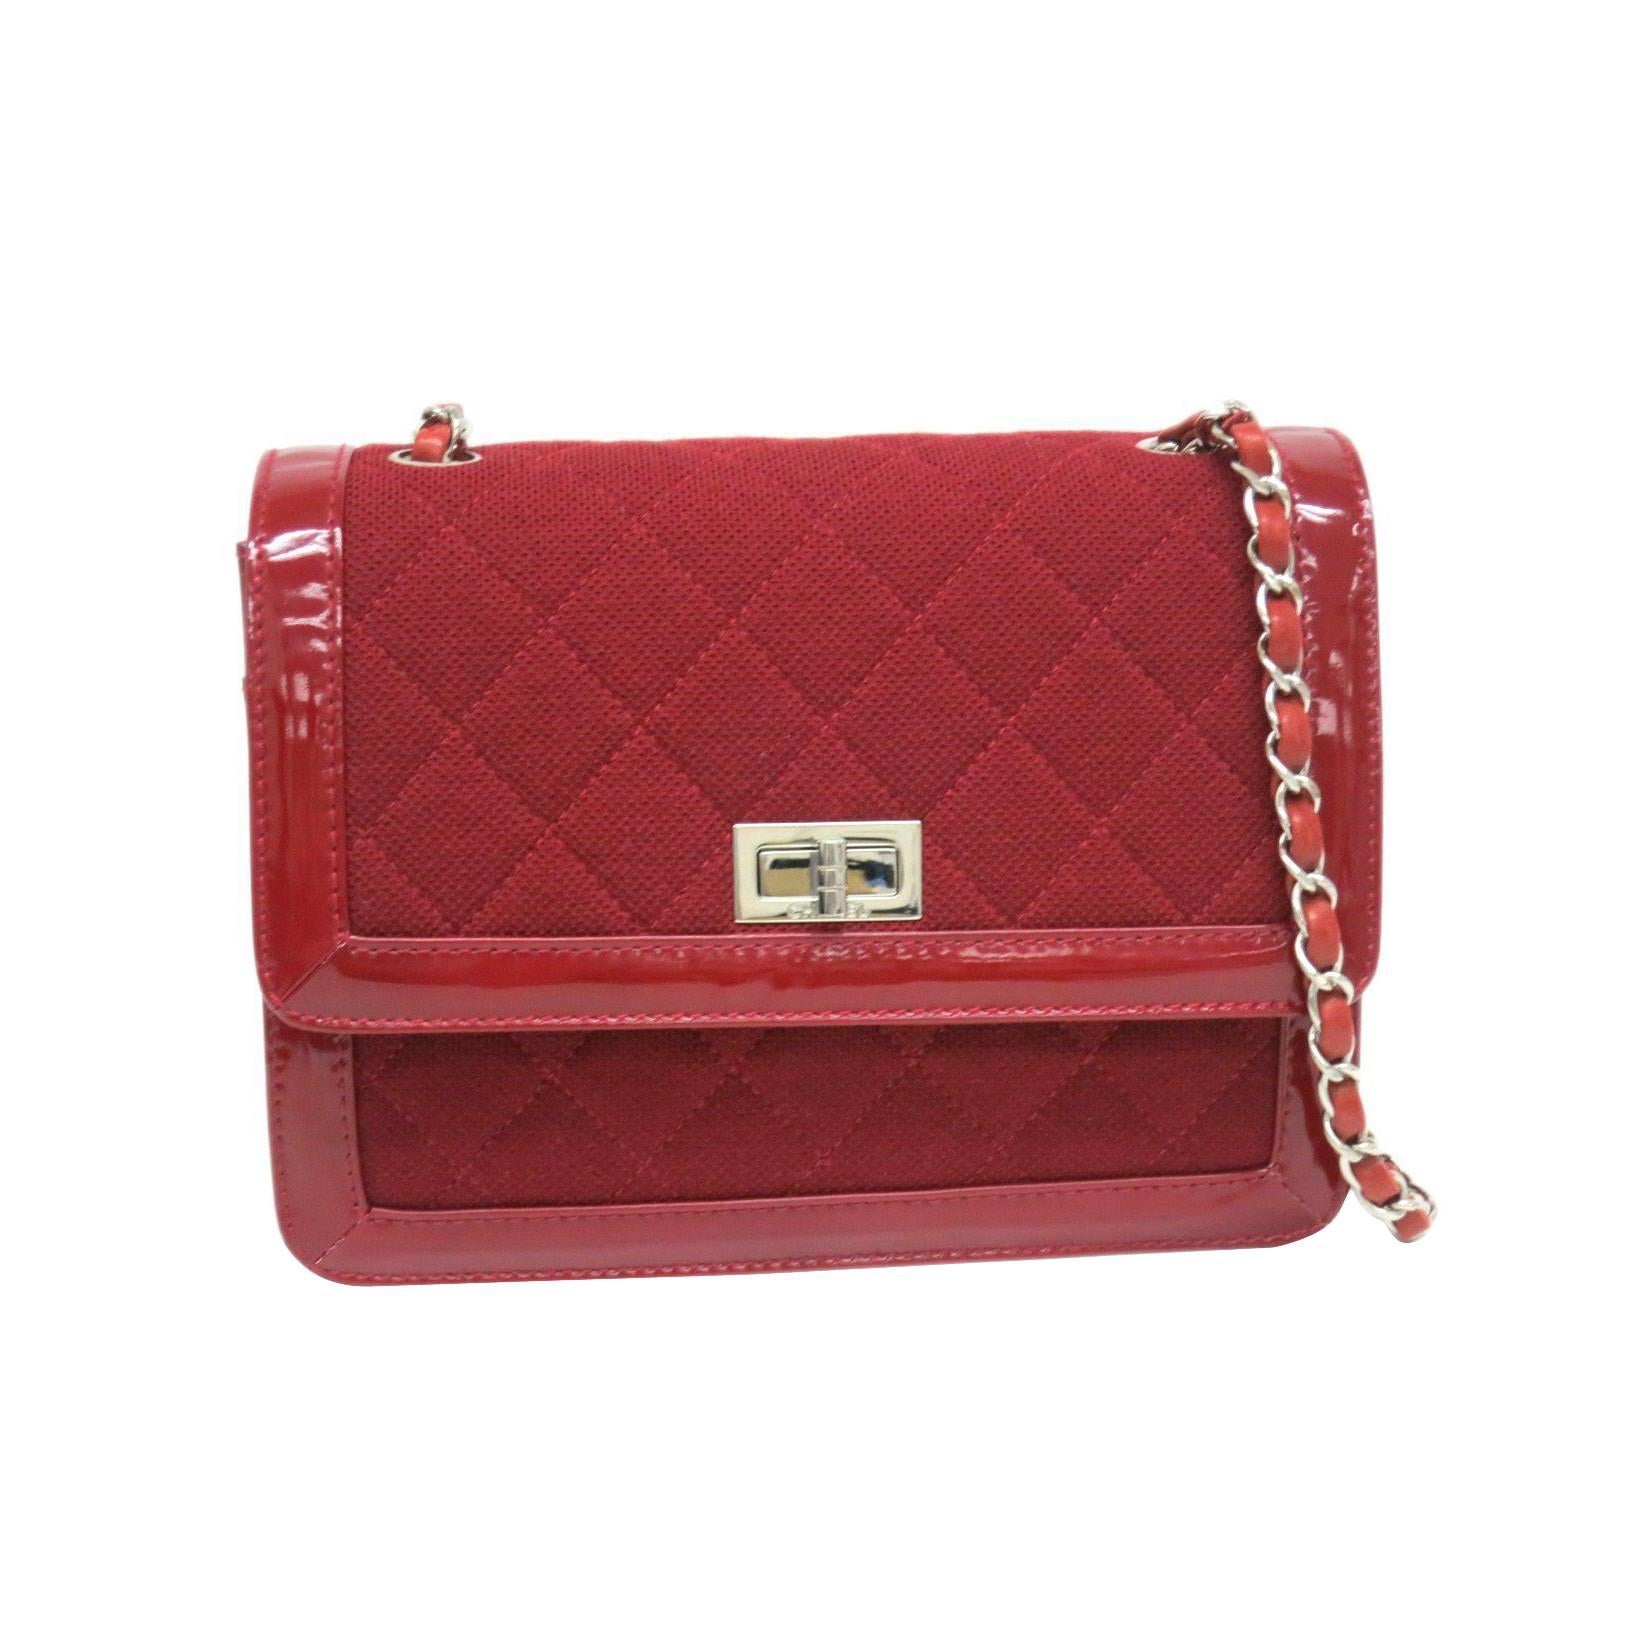 Chanel 2.55 Flap Red Patent Leather and Jersey Flap Shoulder Bag